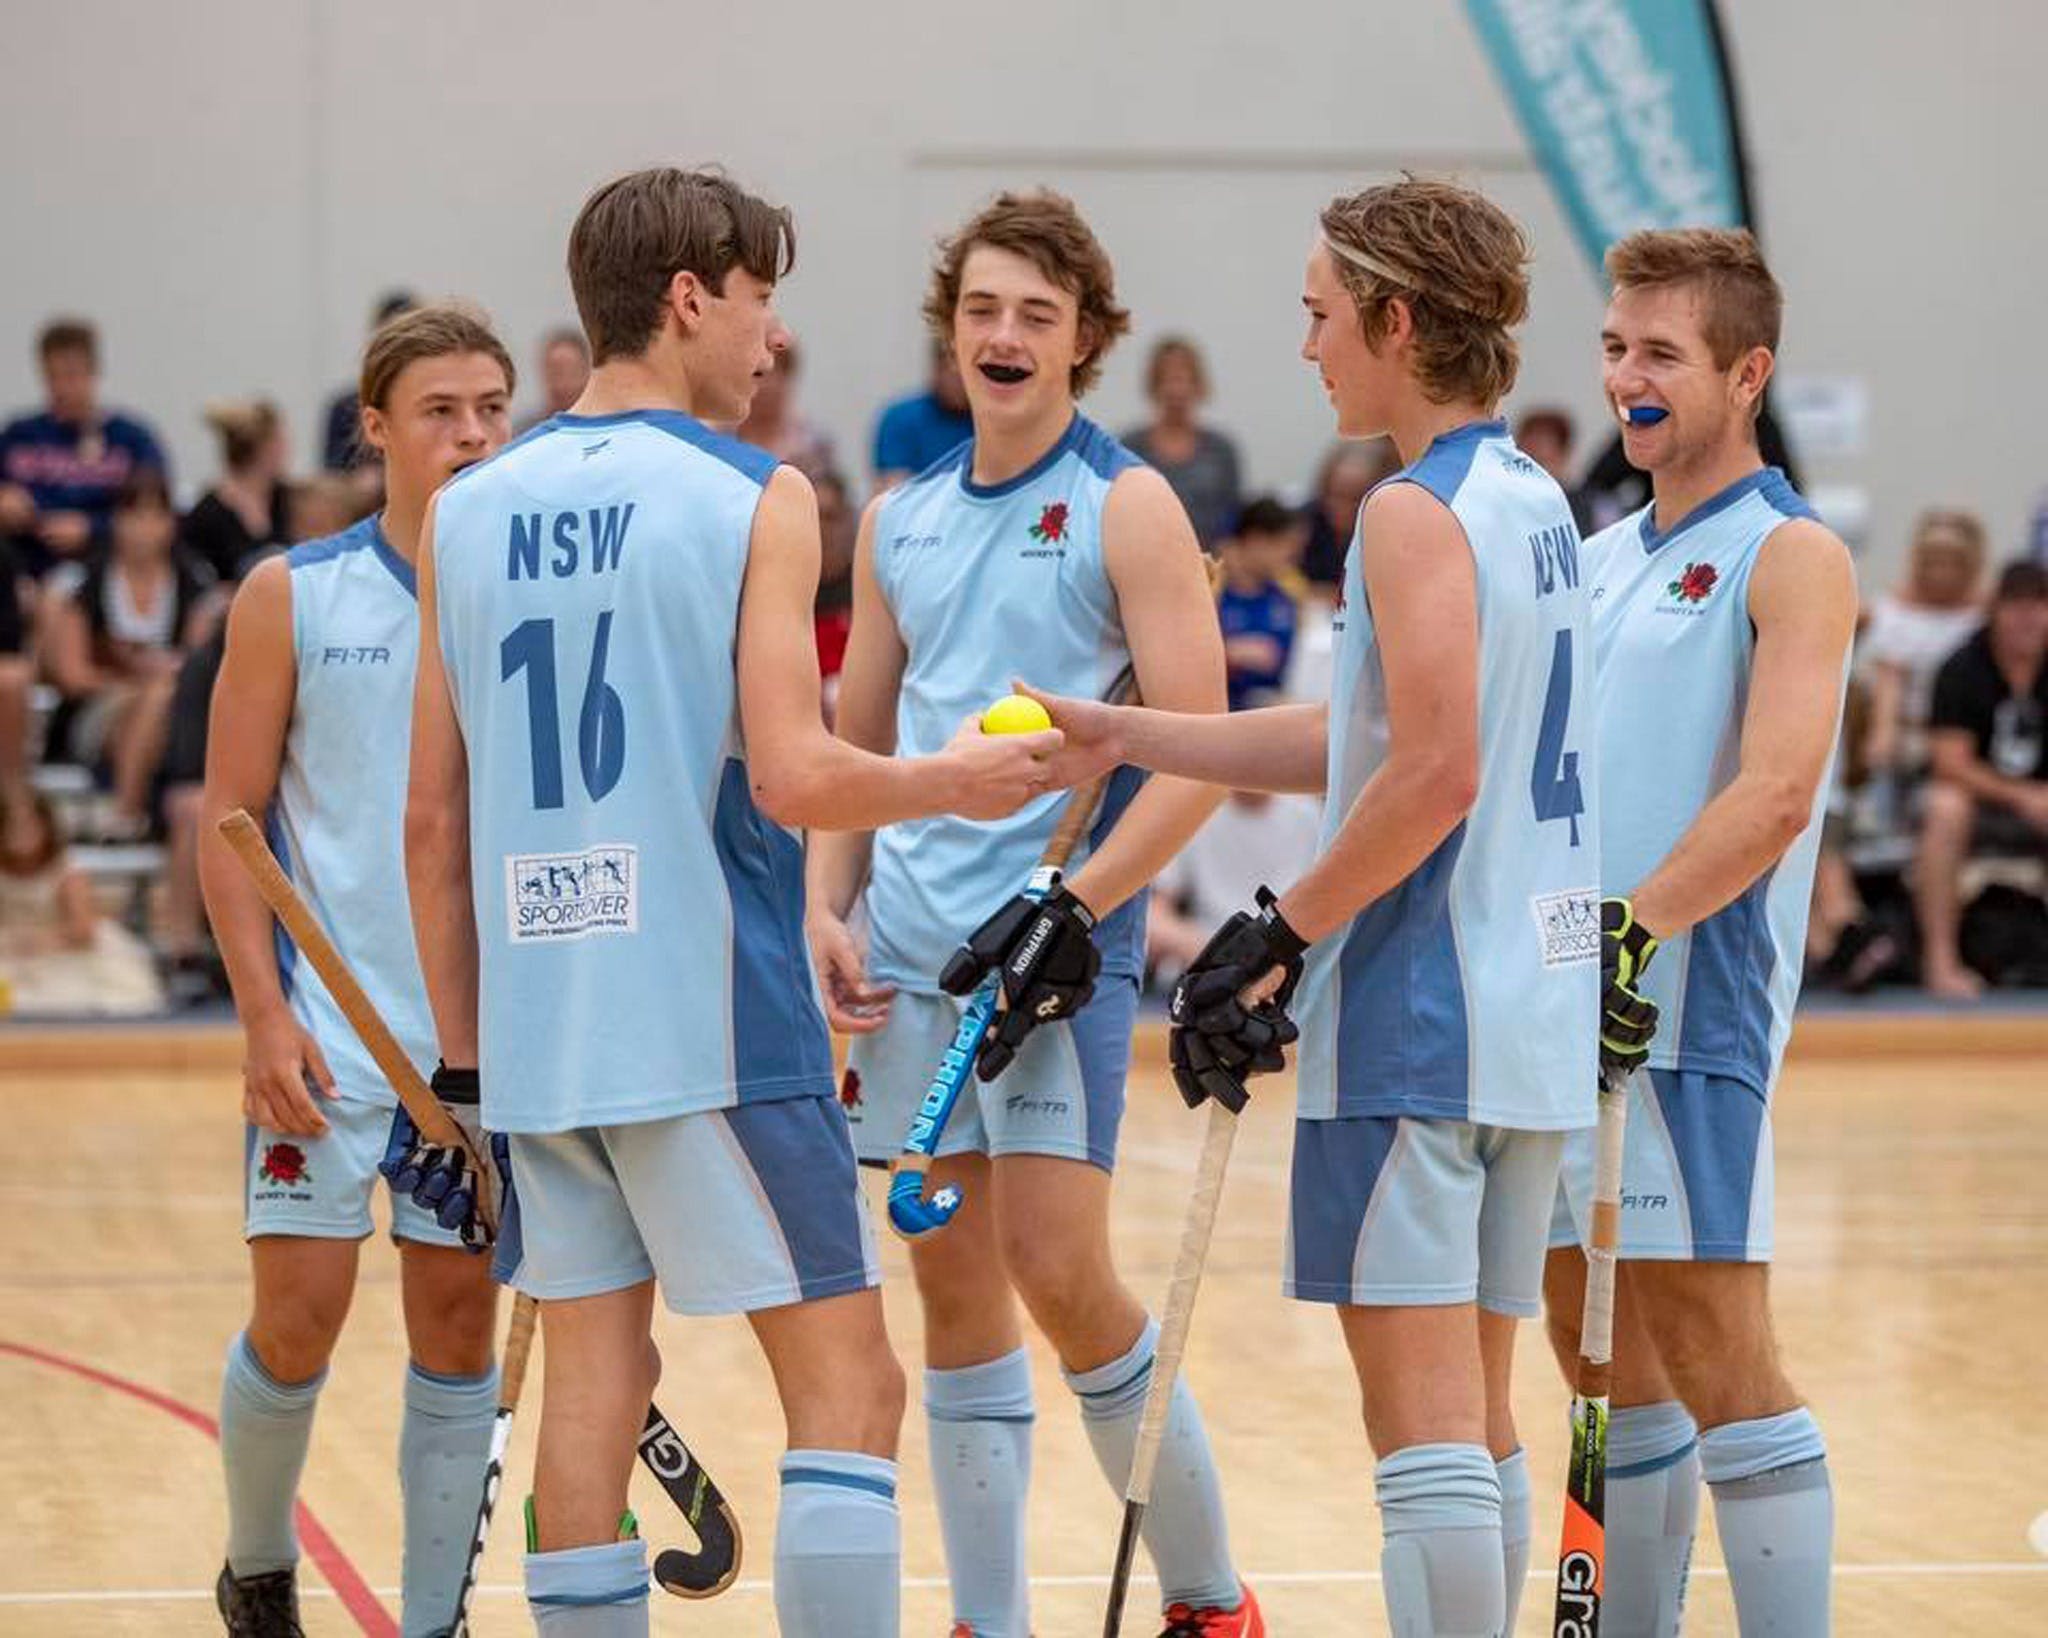 Hockey NSW Indoor State Championship  Open Men - Pubs and Clubs